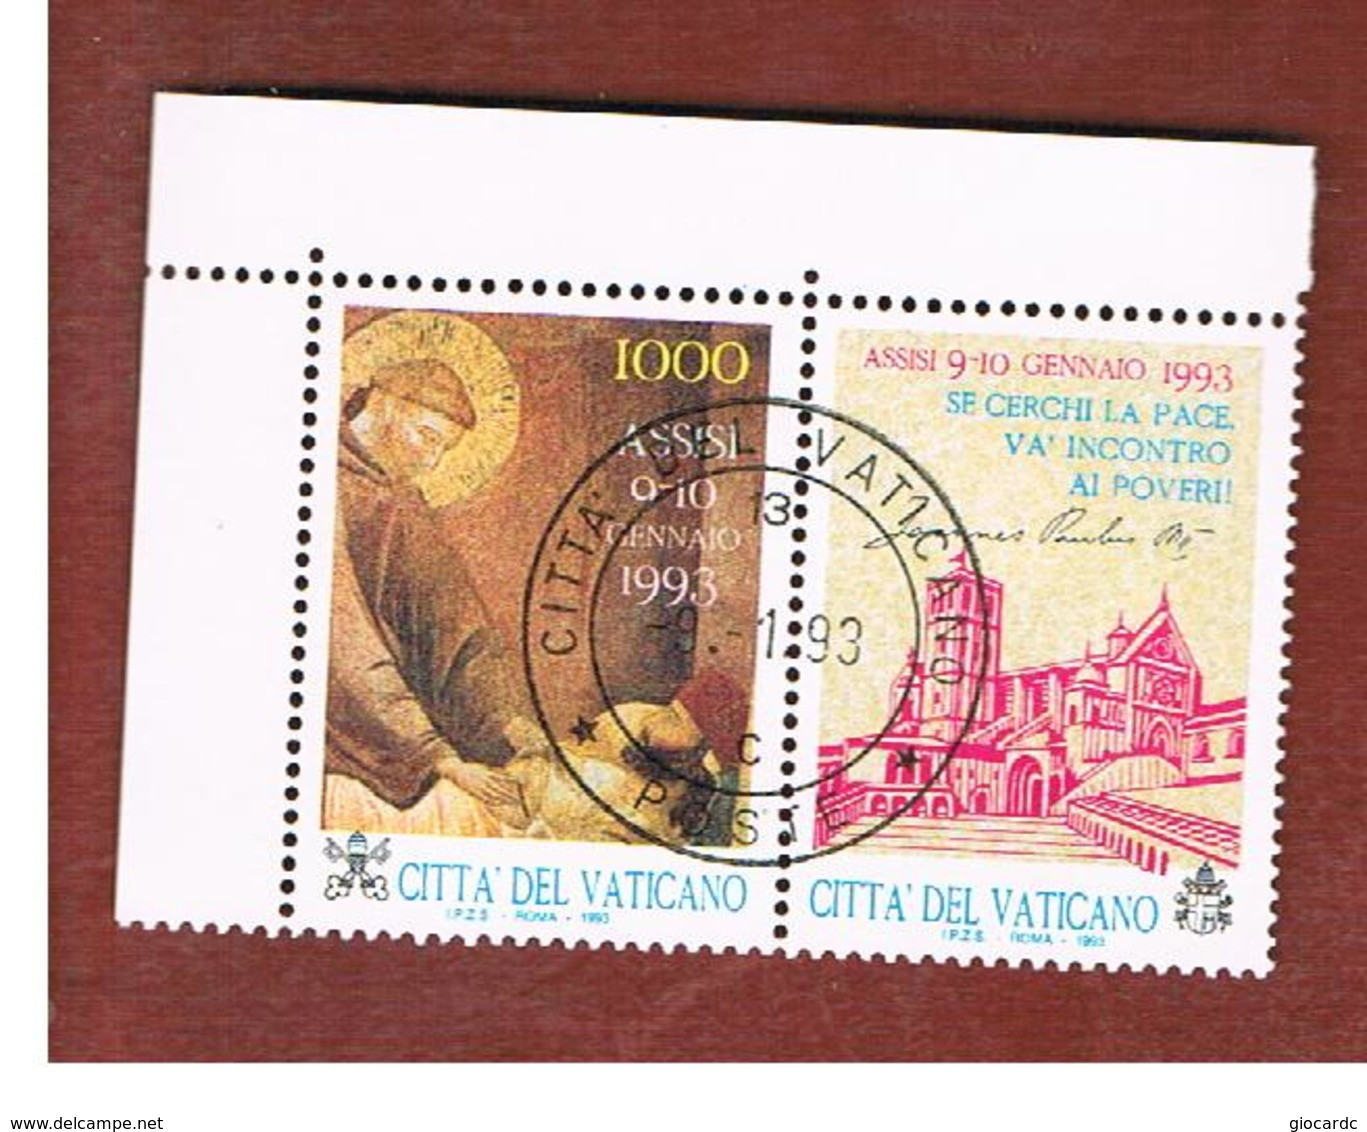 VATICANO - VATICAN - UNIF. 953  - 1993 ASSISI: PACE IN EUROPA (CON APPENDICE)  - (USED°) - Gebraucht